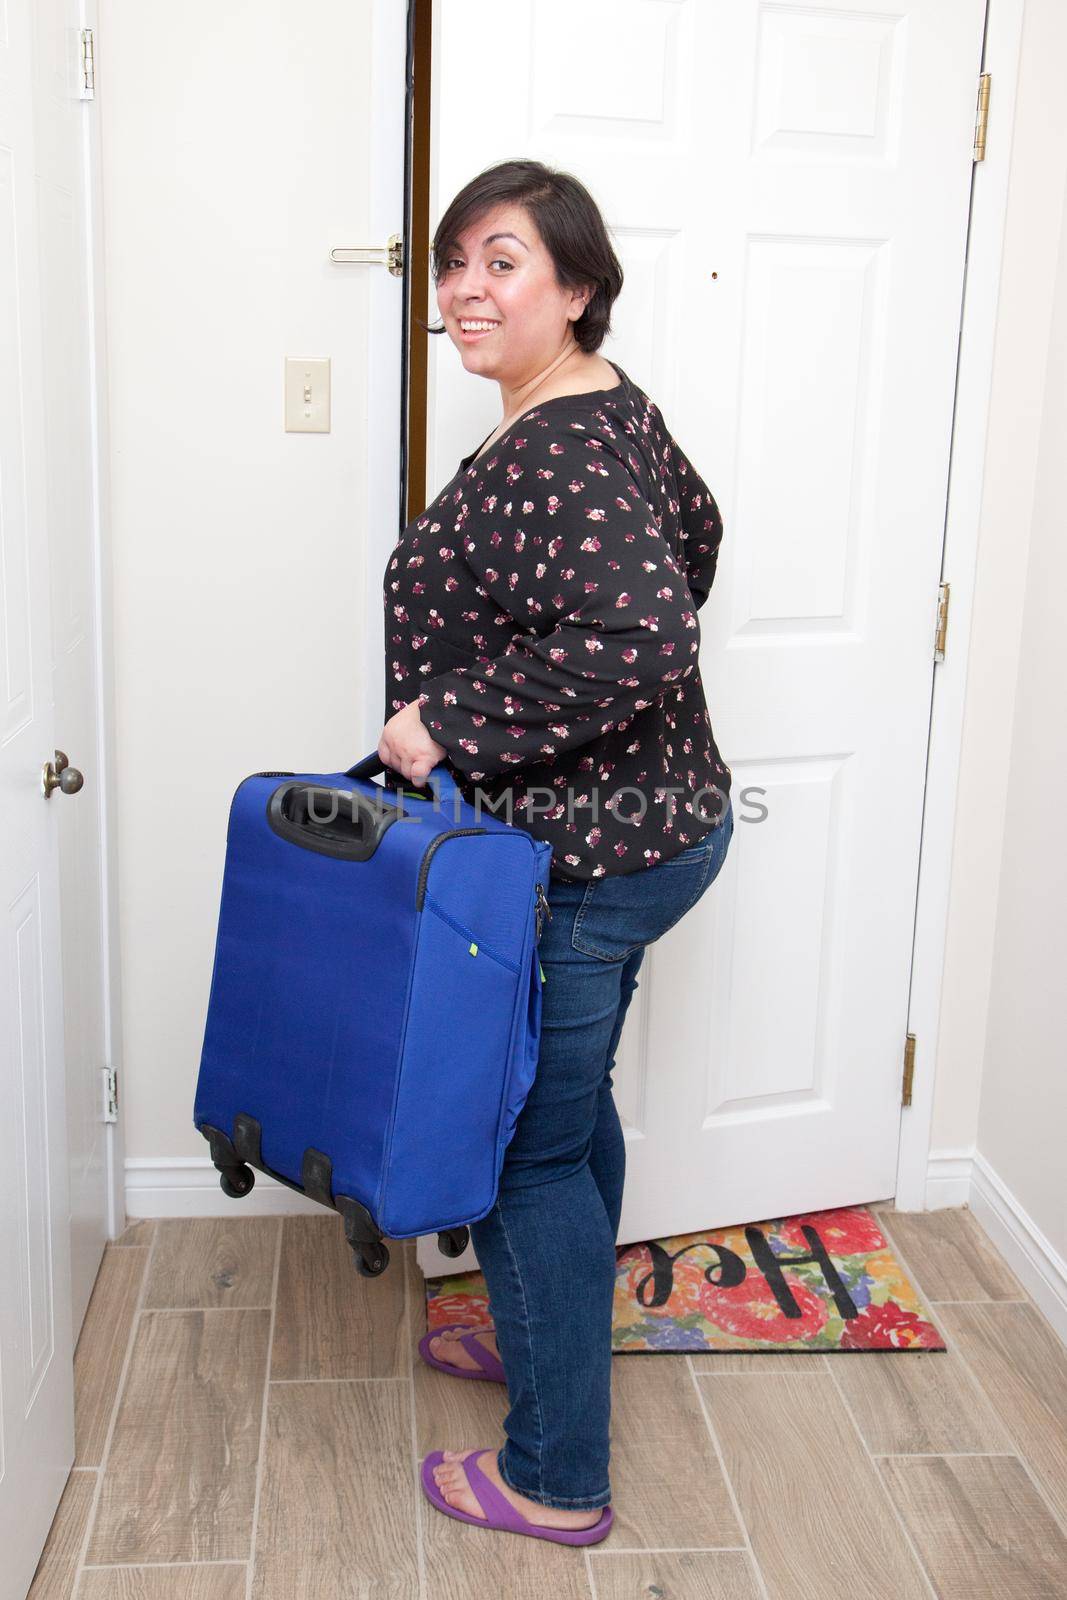  A woman holds her suitcase as she leaves her apartment or house with a smile on her face 